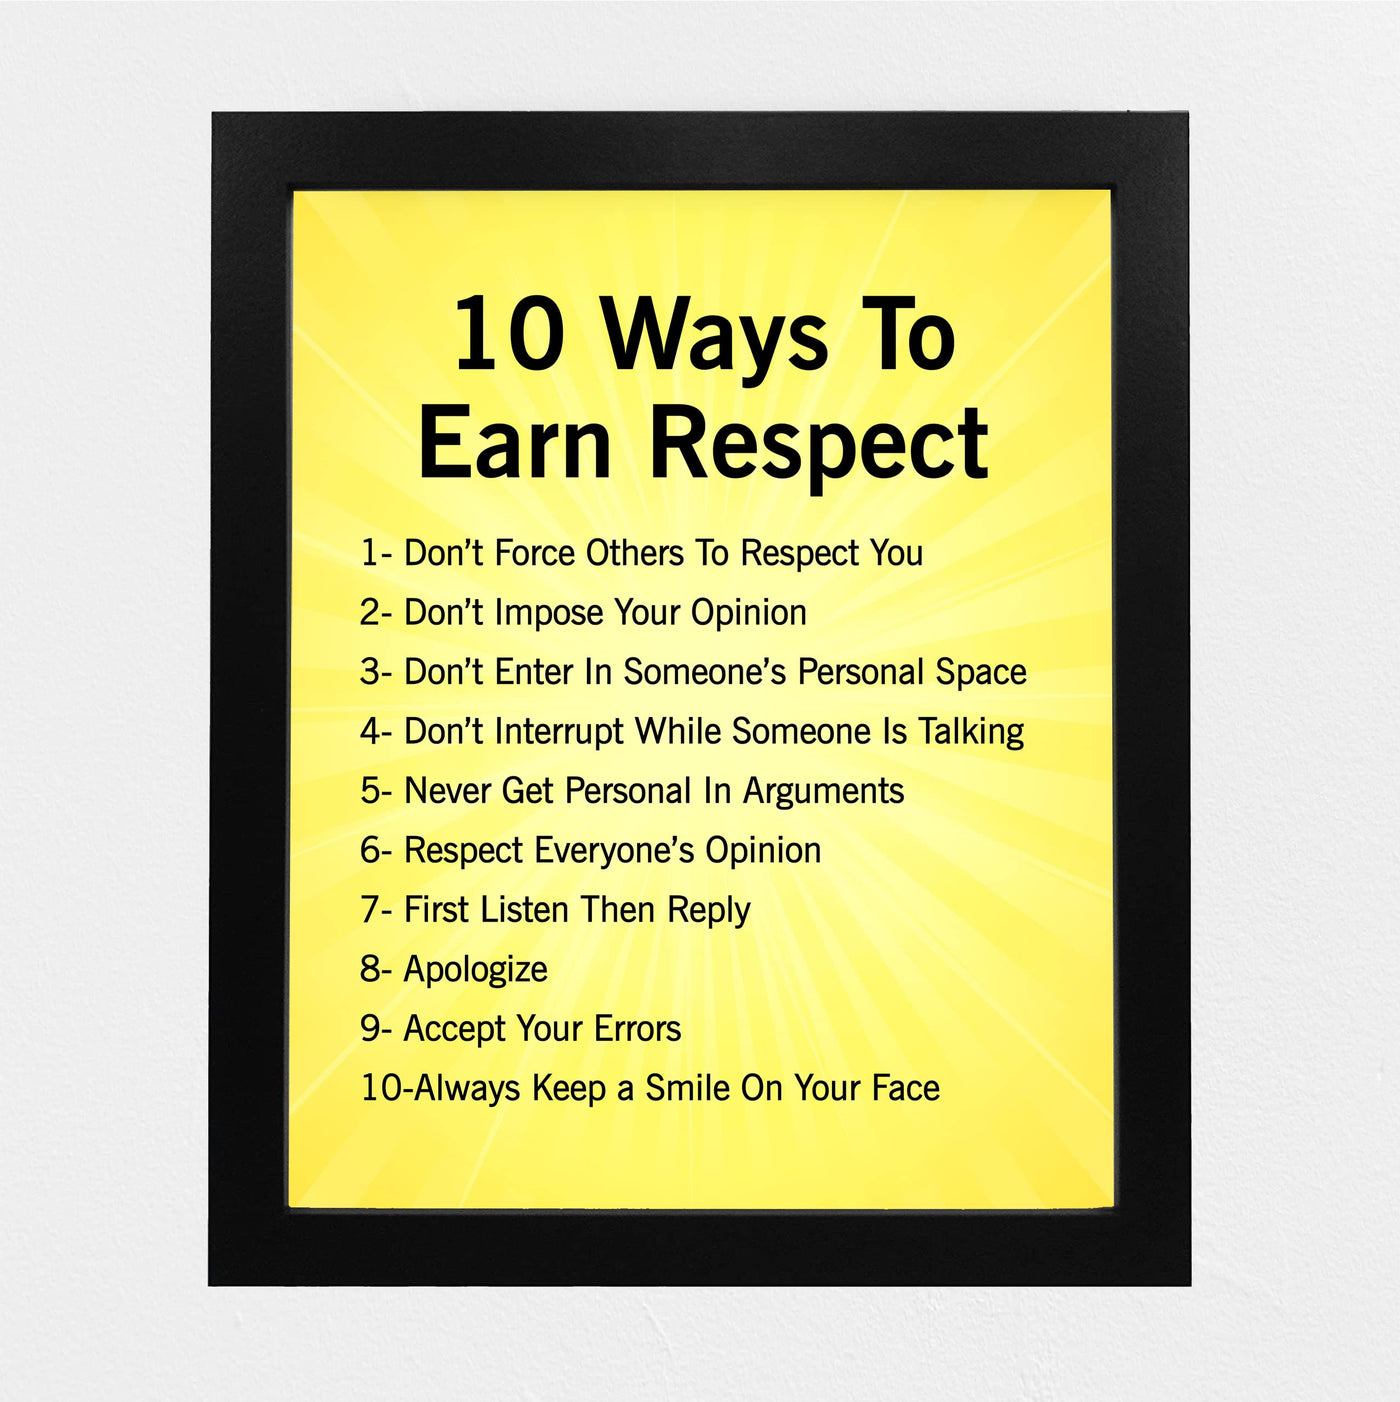 10 Ways to Earn Respect Inspirational Affirmations Wall Art -8 x 10" Motivational Quotes Print -Ready to Frame. Positive Decoration for Home-Office-Classroom-Success Decor. Gifts for Inspiration!